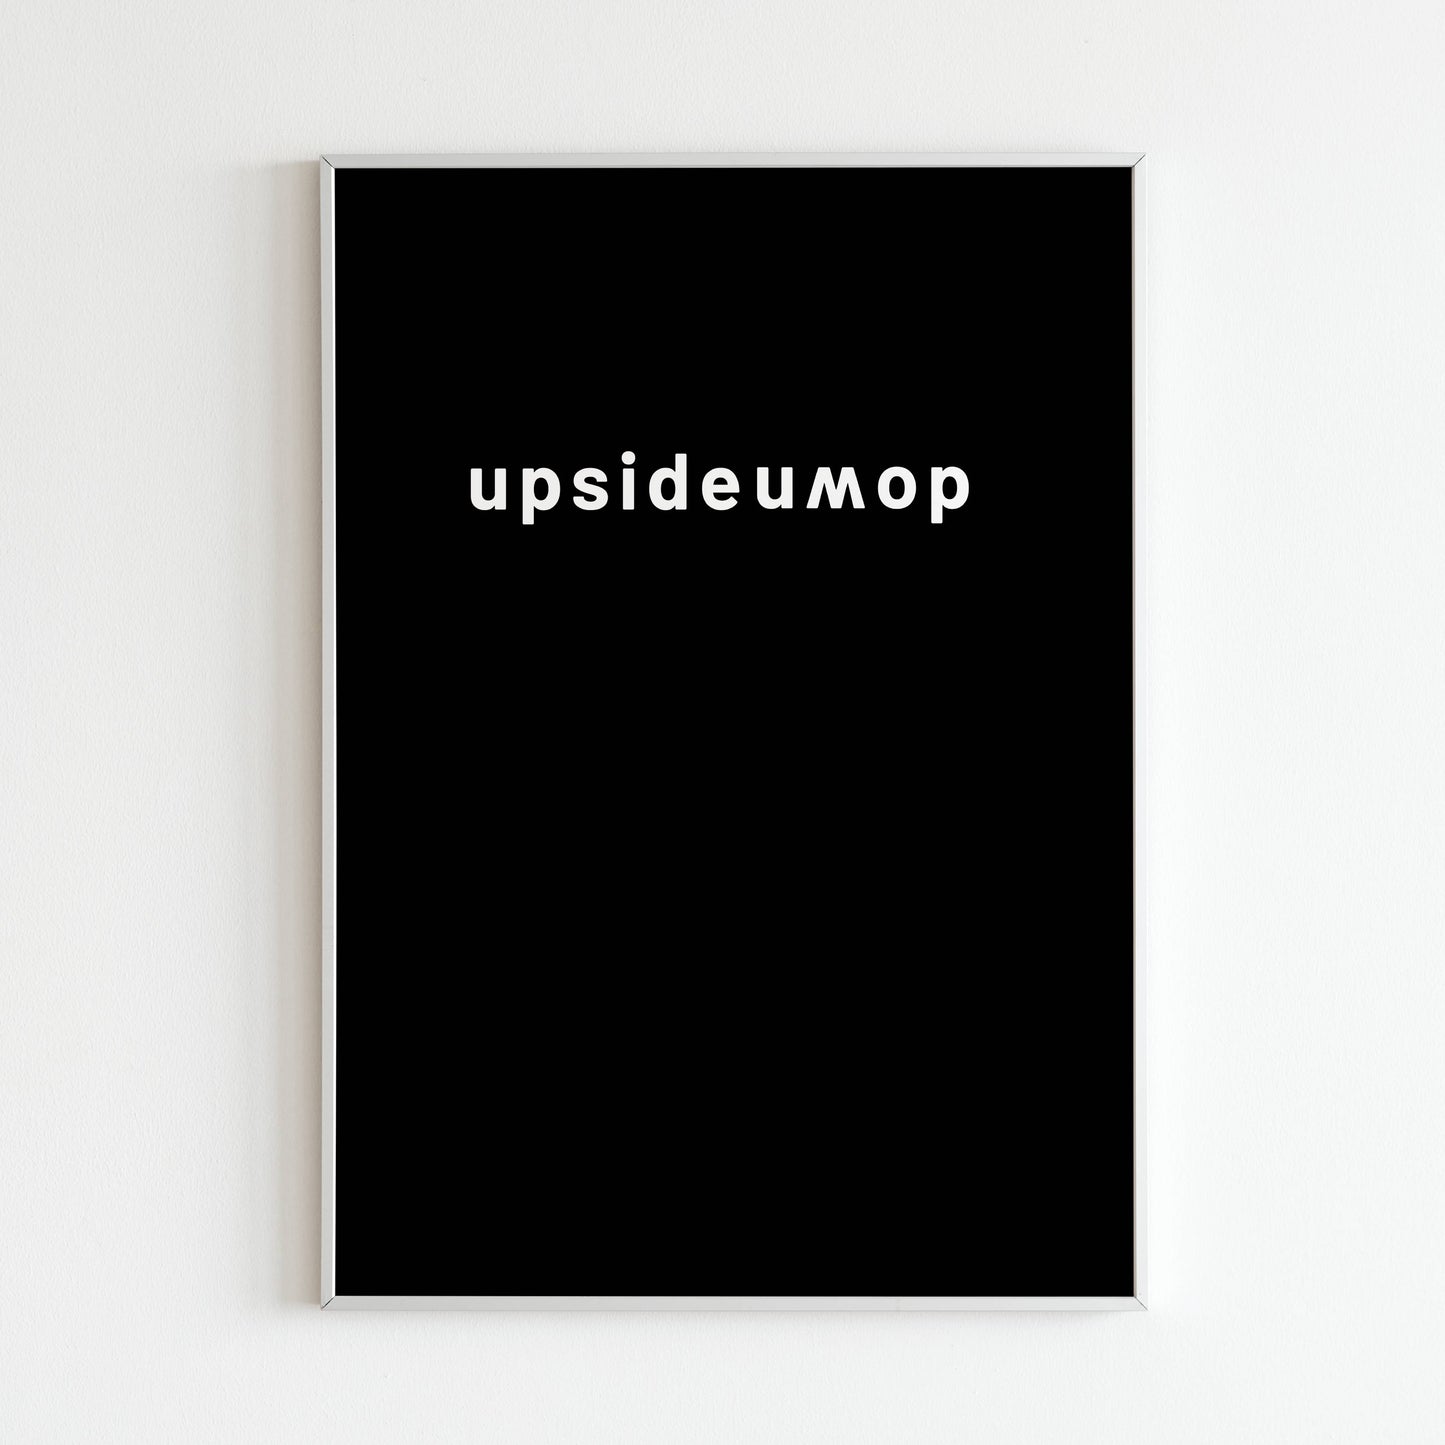 Downloadable "Upsidedown" art print, add a touch of whimsy and challenge conventional thinking with this design.